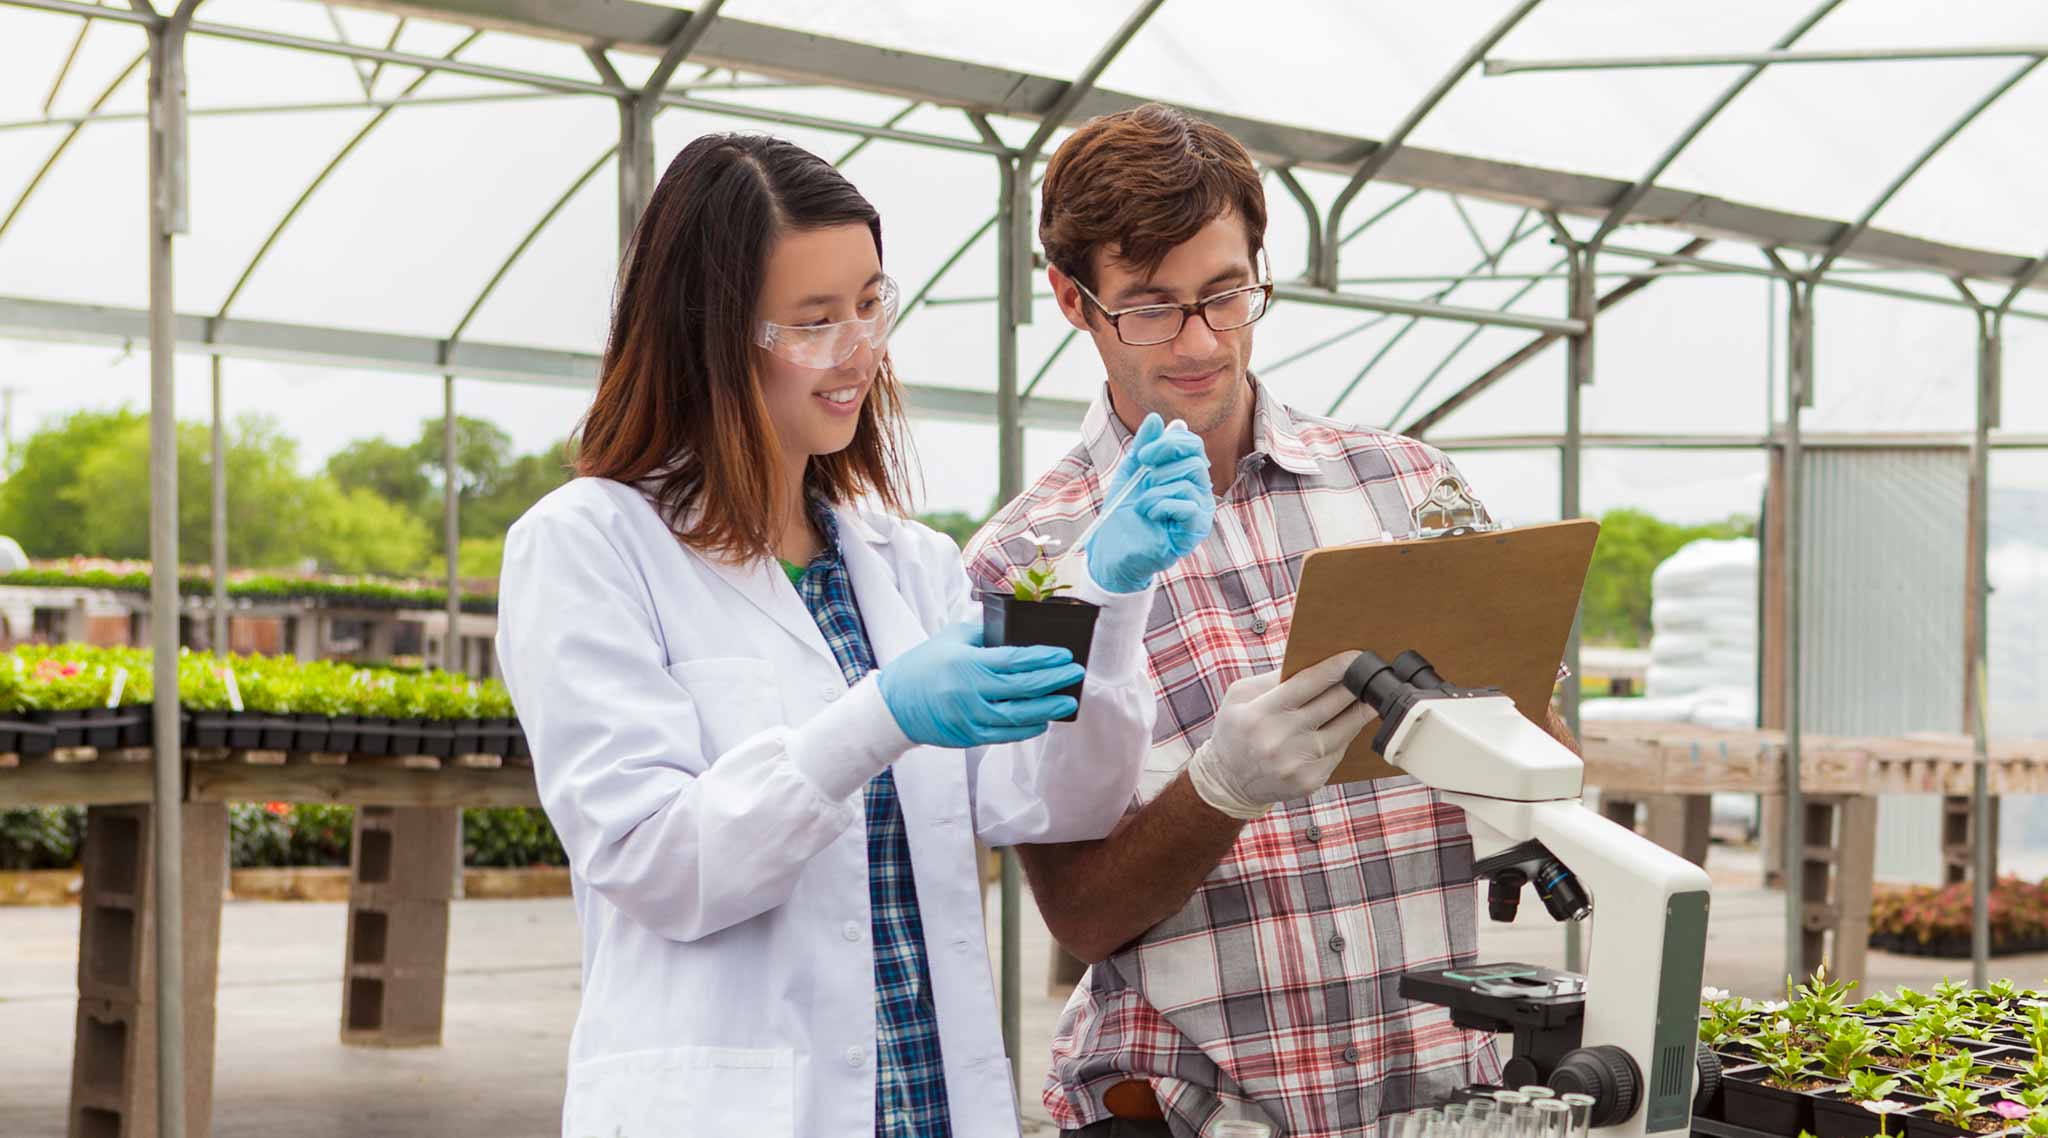 Two agricultural professionals working in a greenhouse.